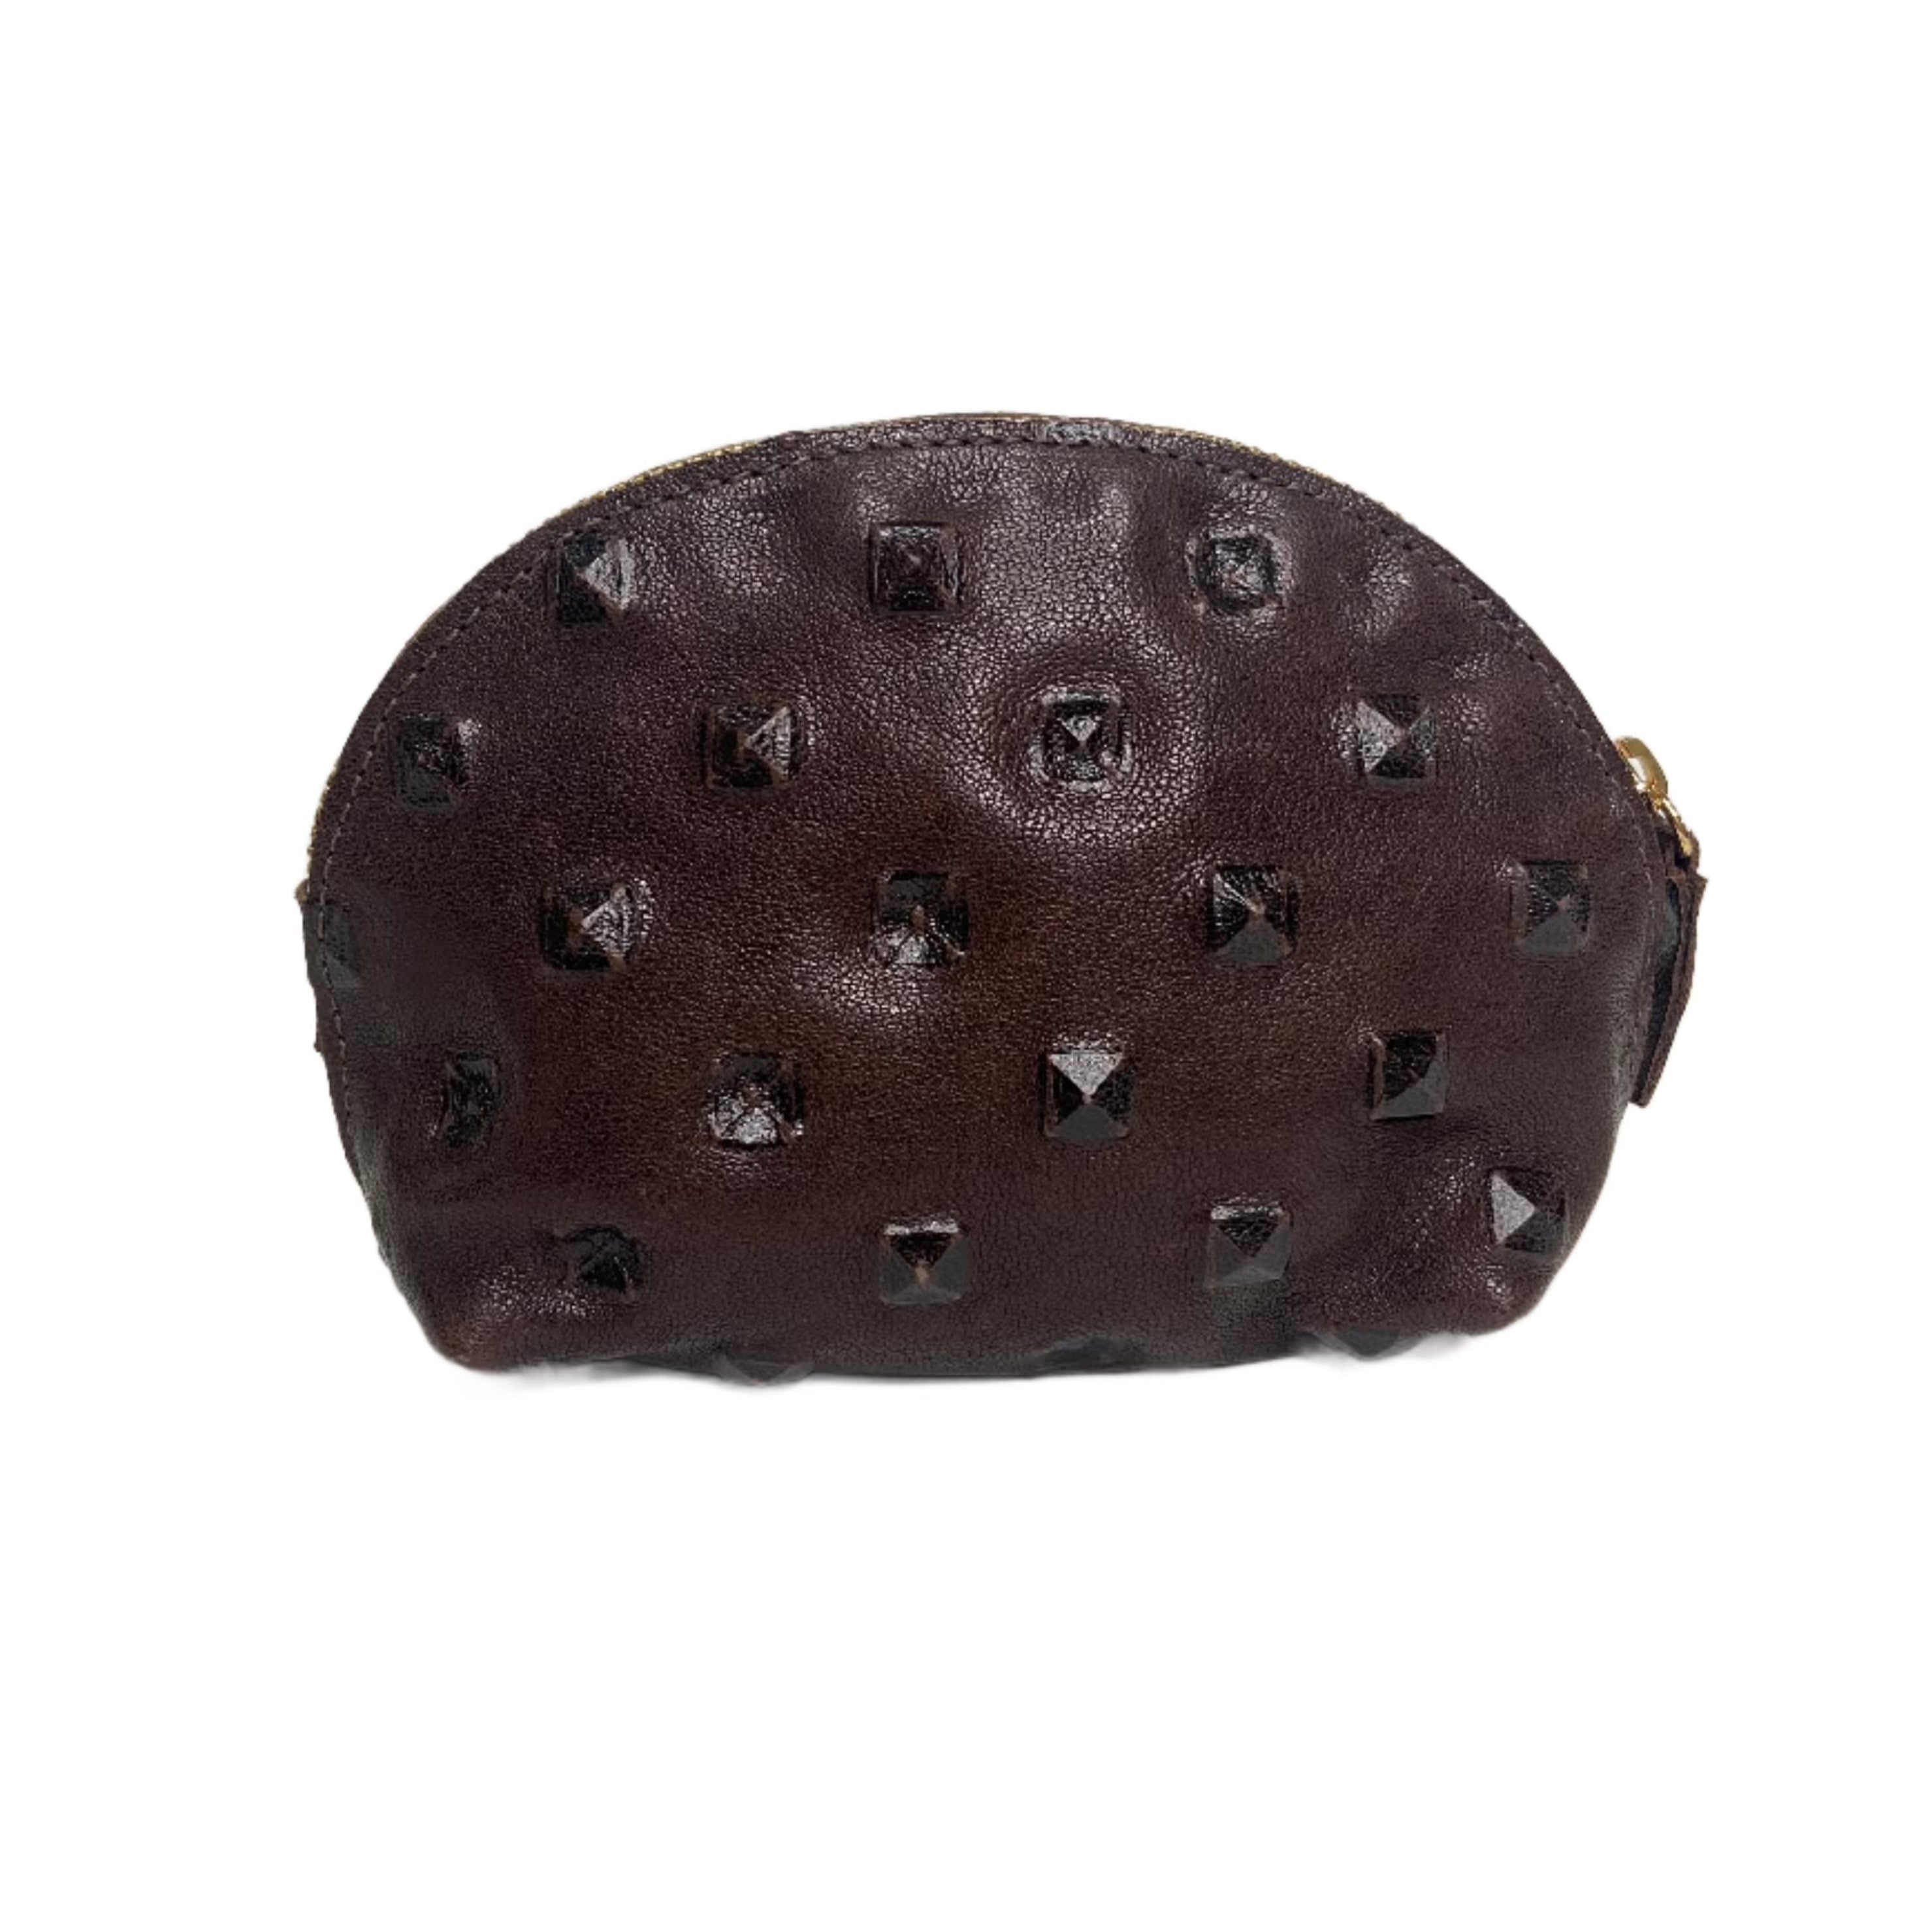 Studded Change Pouch